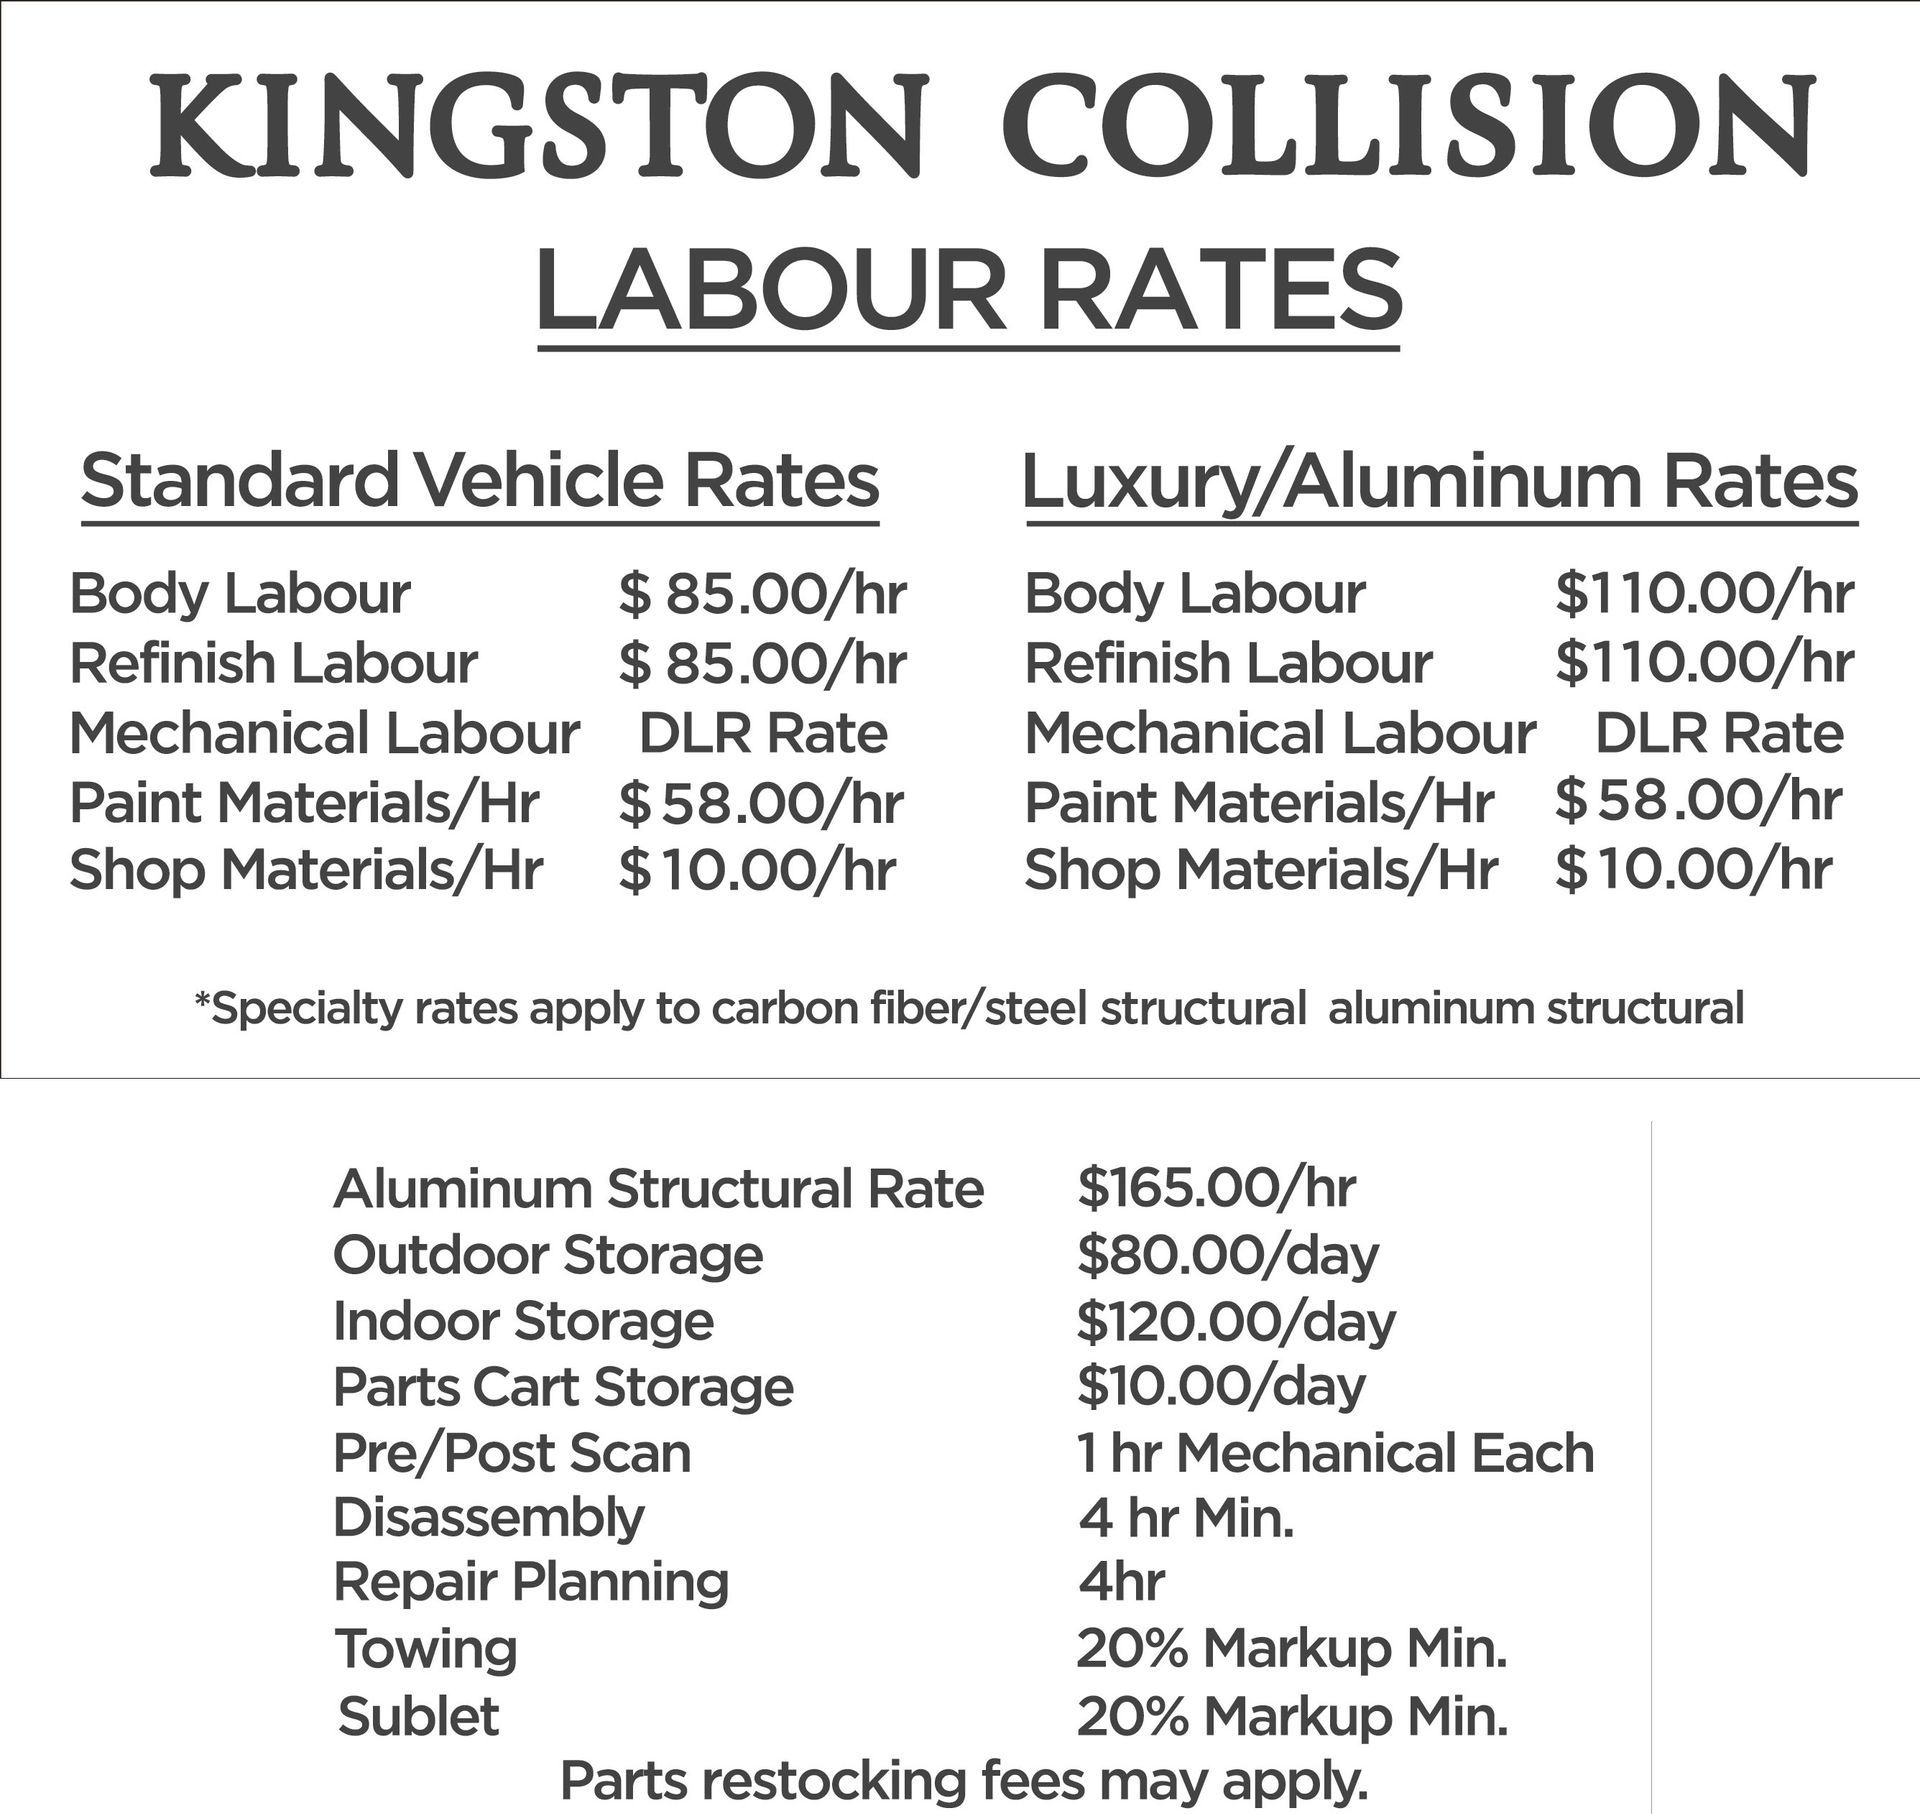 Kingston collision labour rates for standard vehicle rates and luxury / aluminum rates